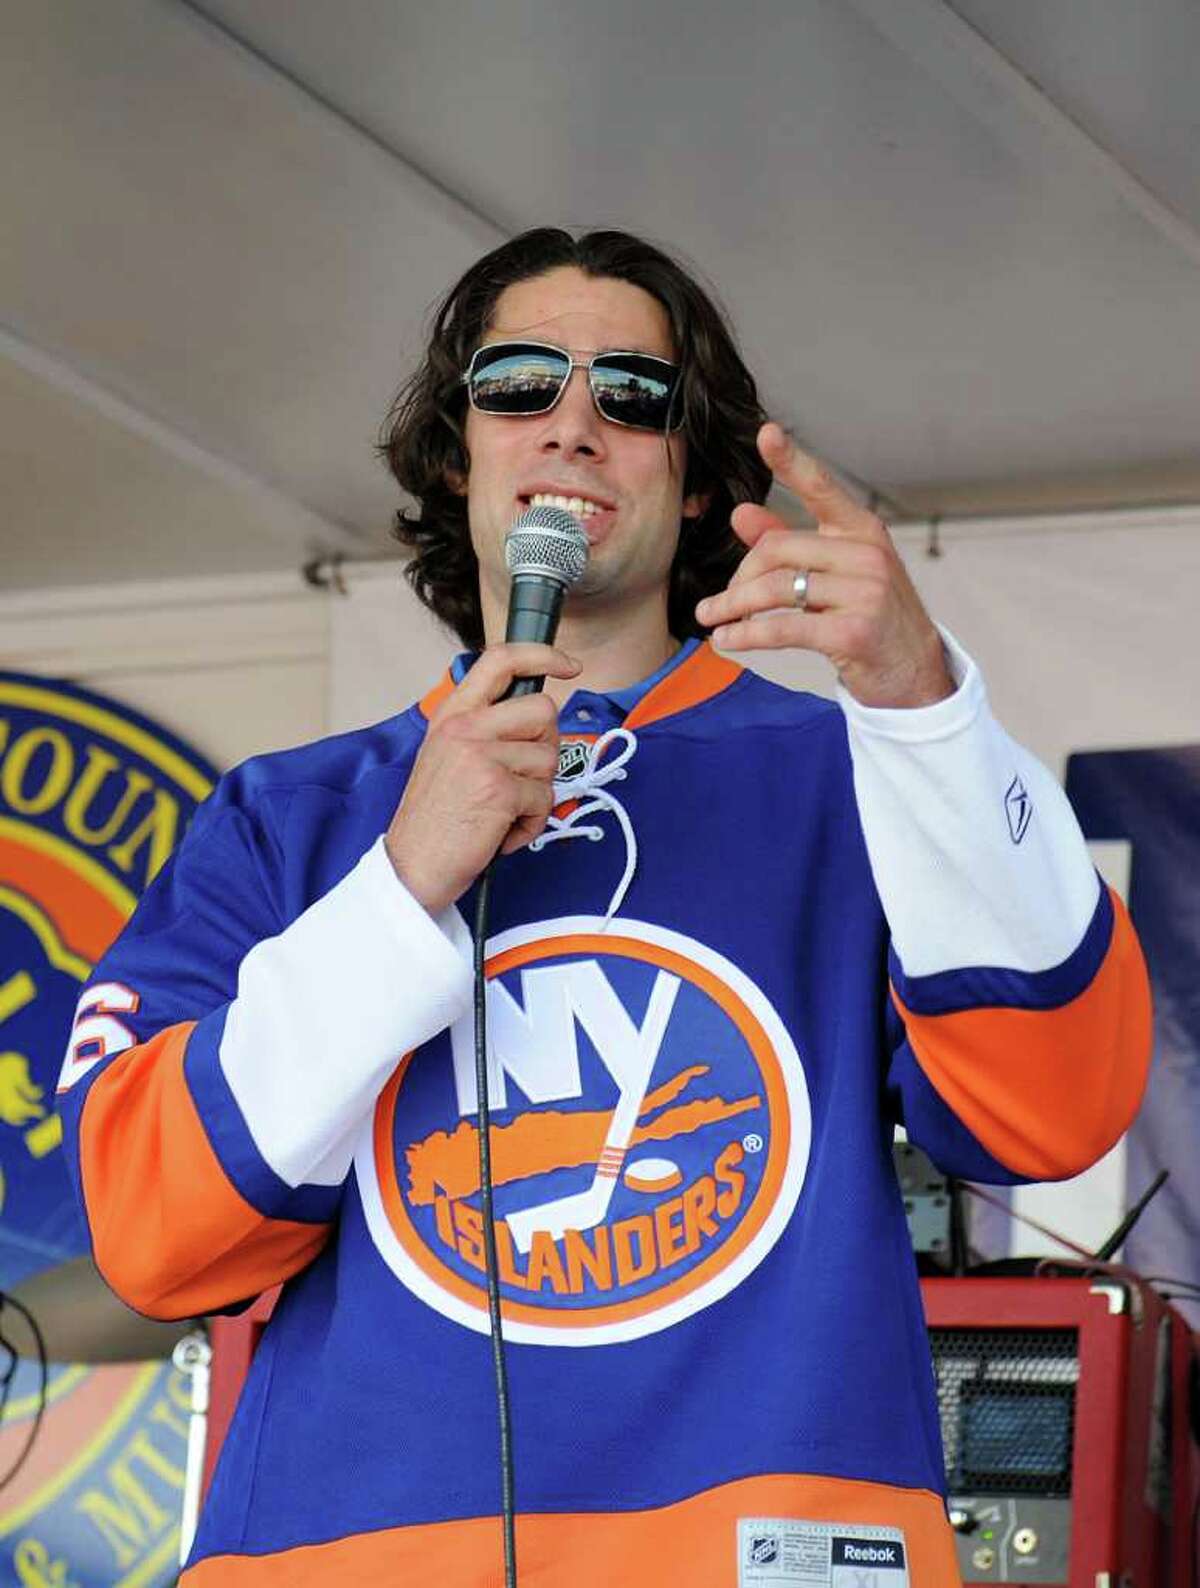 UNIONDALE, NY - JULY 27: Matt Moulson #36 of the New York Islanders speaks during the fan rally at Nassau Coliseum on July 27, 2011 in Uniondale, New York. (Photo by Christopher Pasatieri/Getty Images)